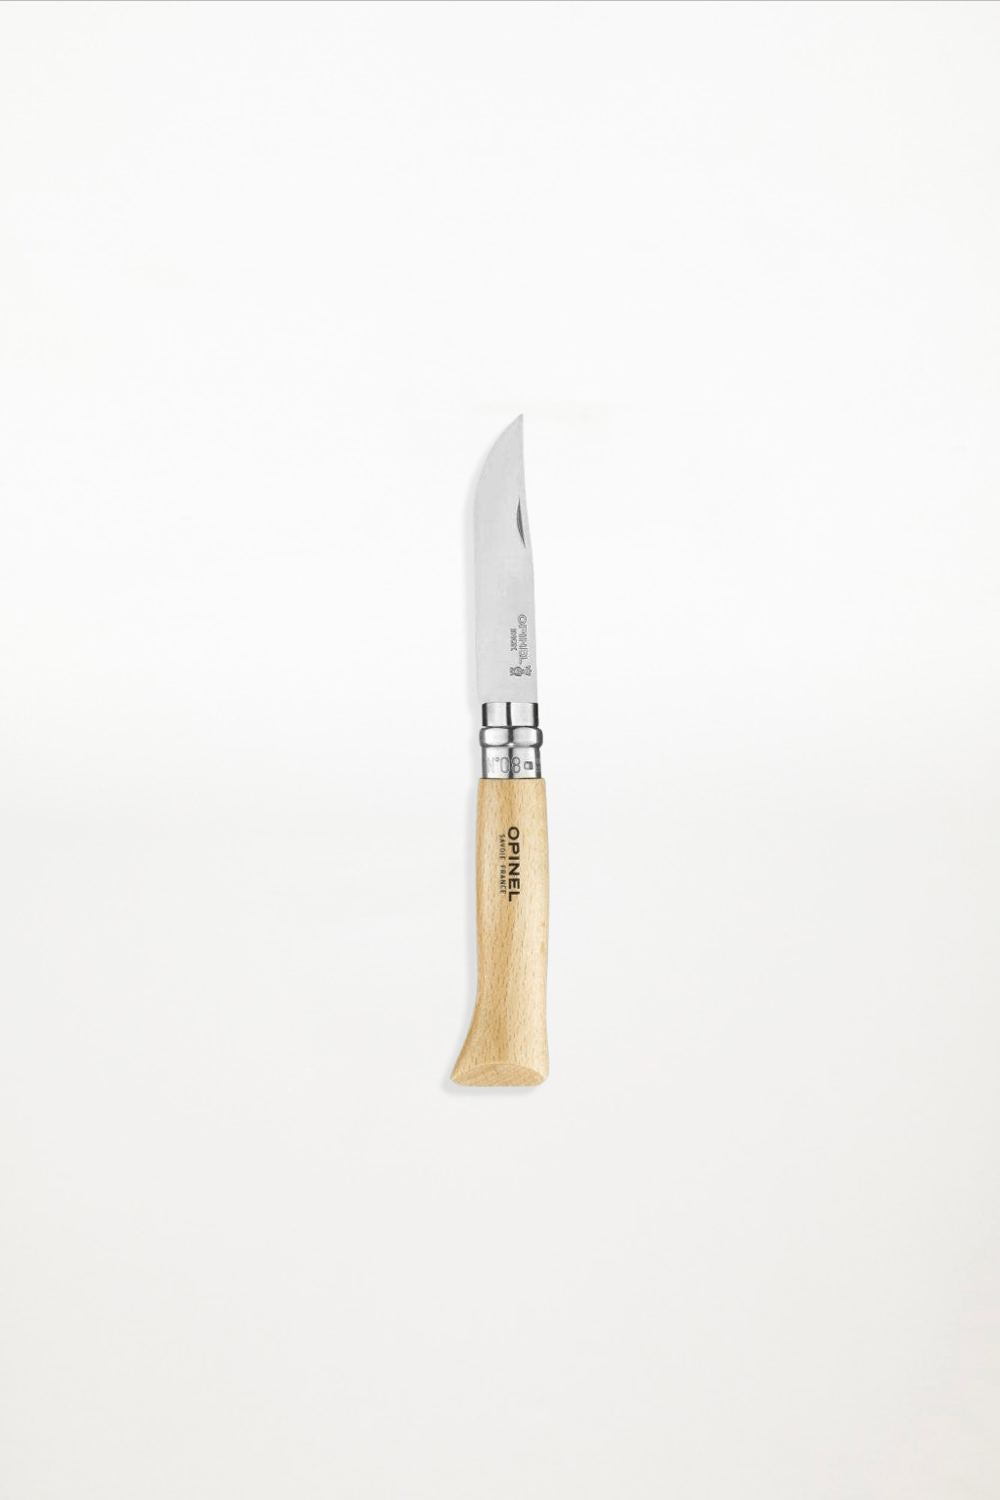 Opinel - Traditional French Pocket Knife - N8 - Ensemble Studios